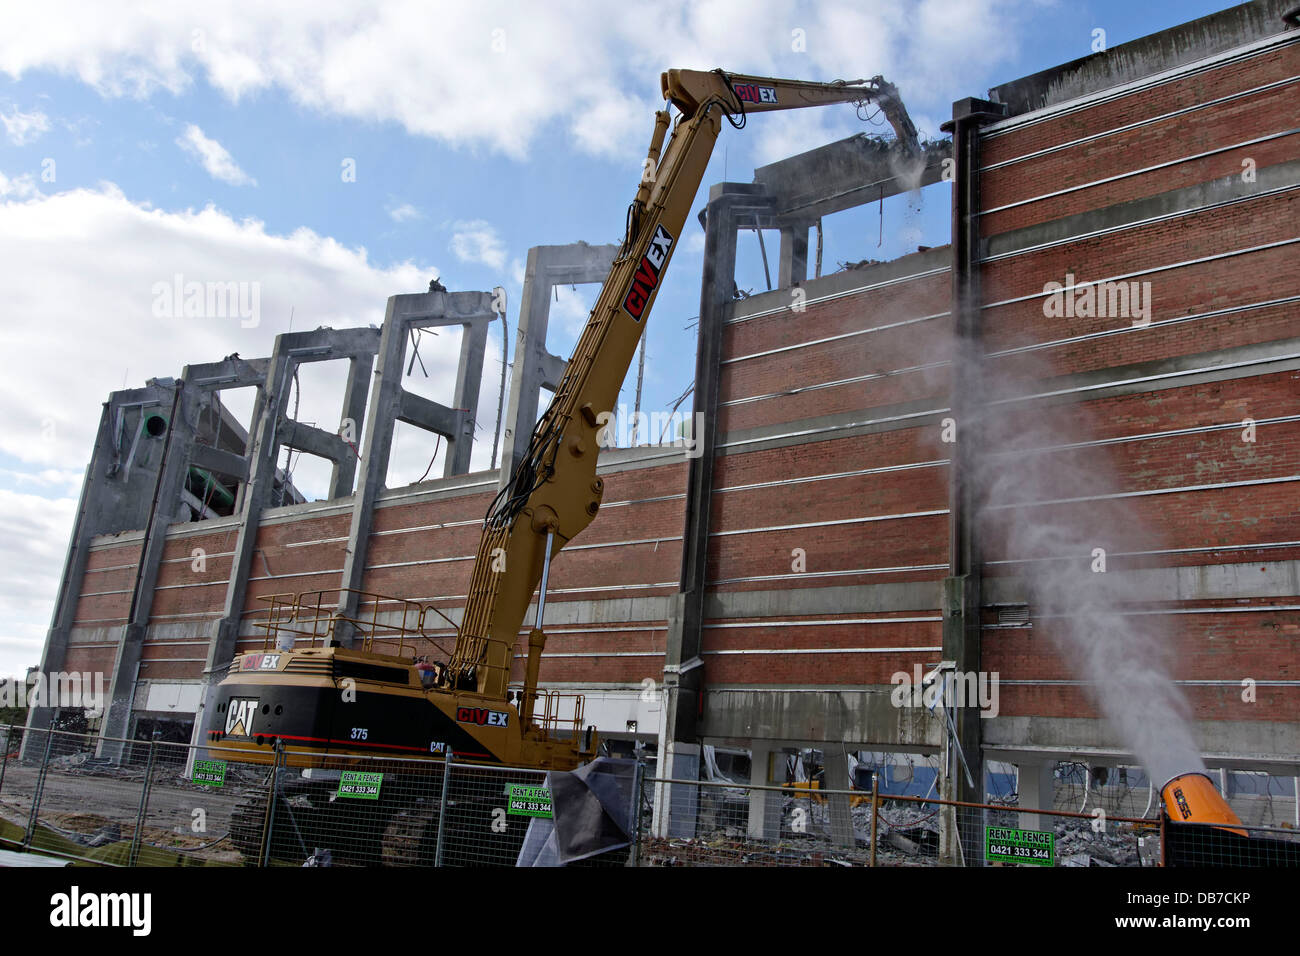 Demolition of the Perth Superdome building in July/ August 2013, Western Australia Stock Photo